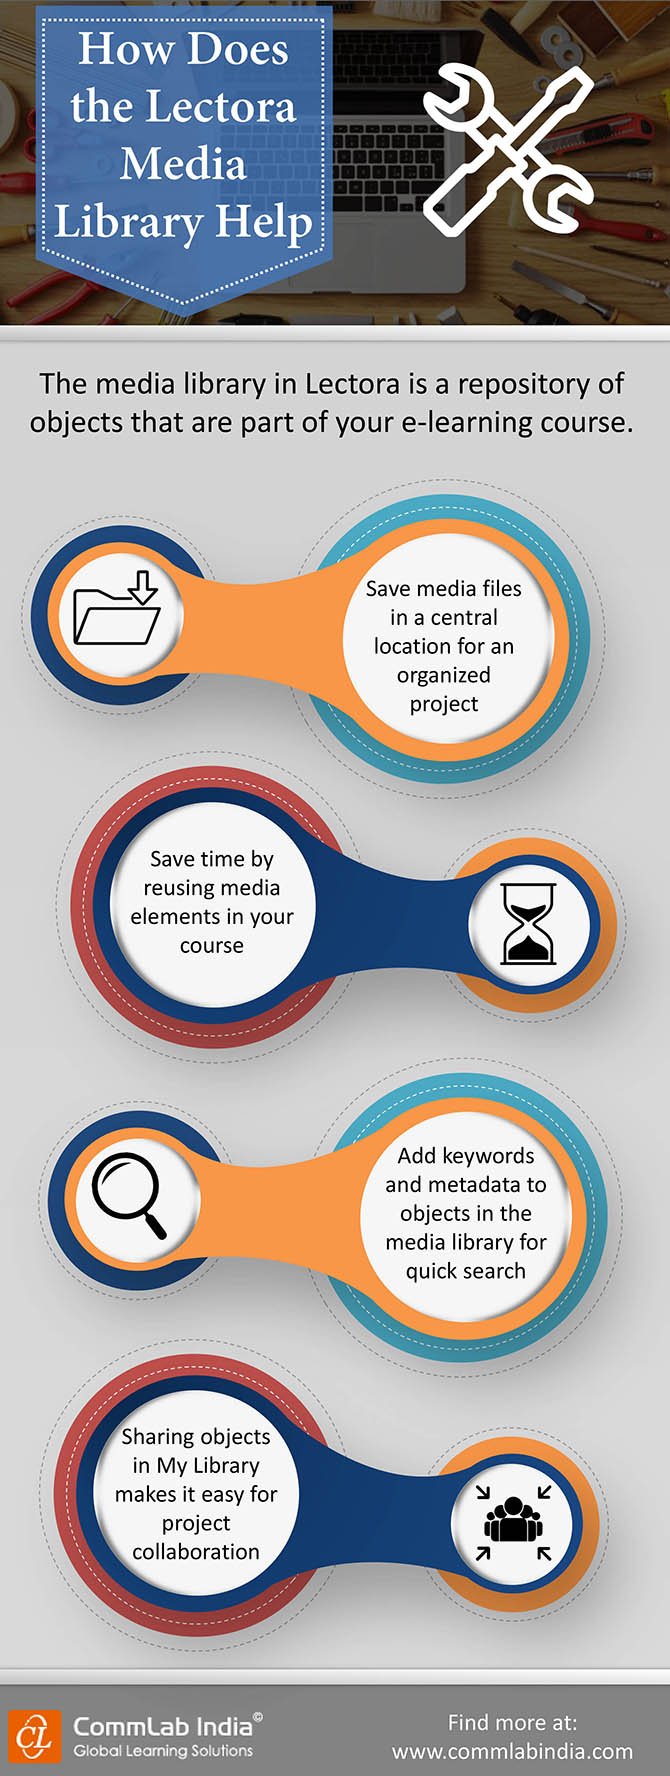 How Does the Lectora Media Library Help? [Infographic]